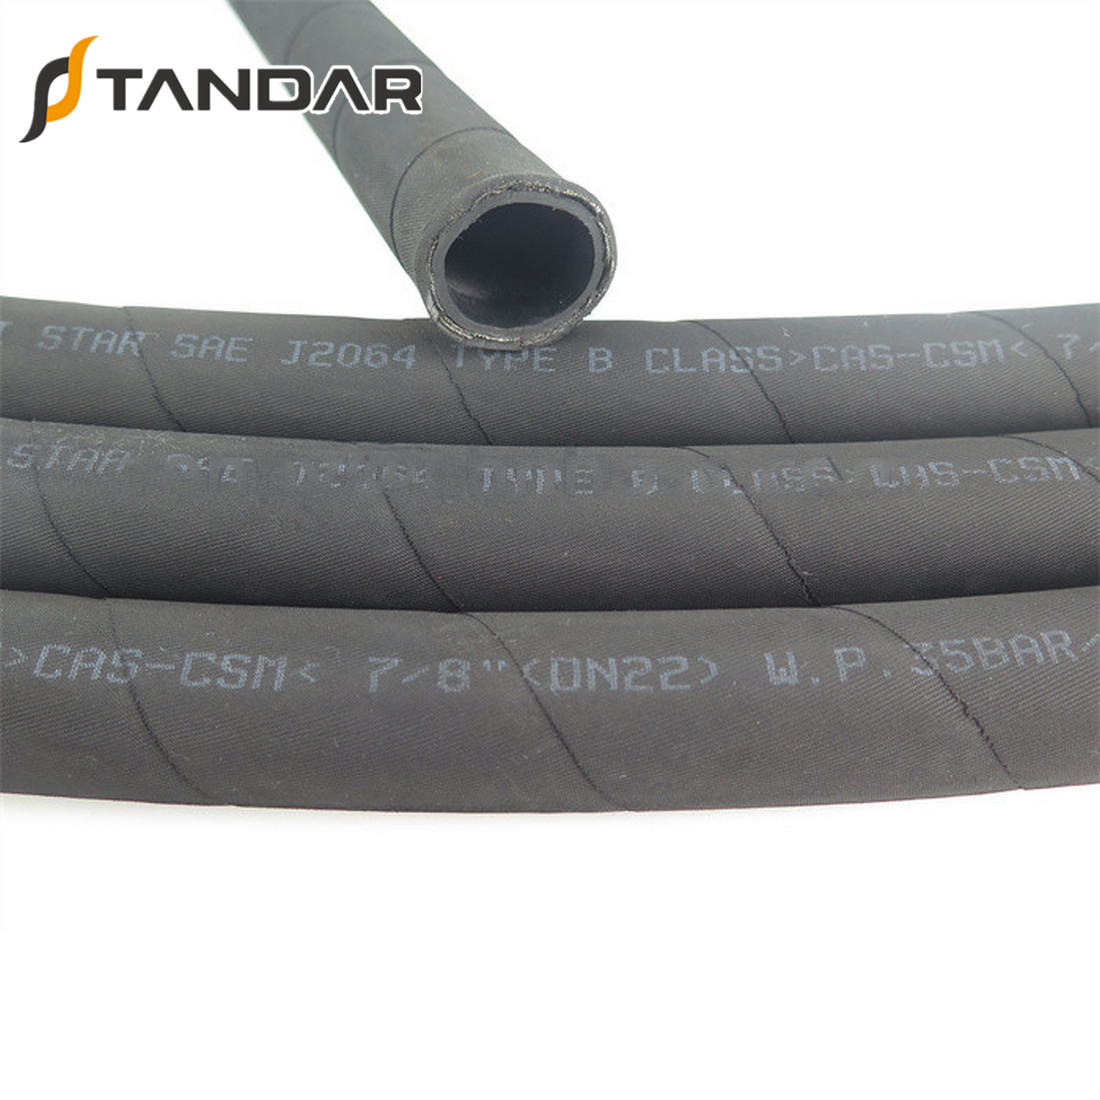 SAE J2064 TYPE B Air Conditioning Hose For Refrigeration System